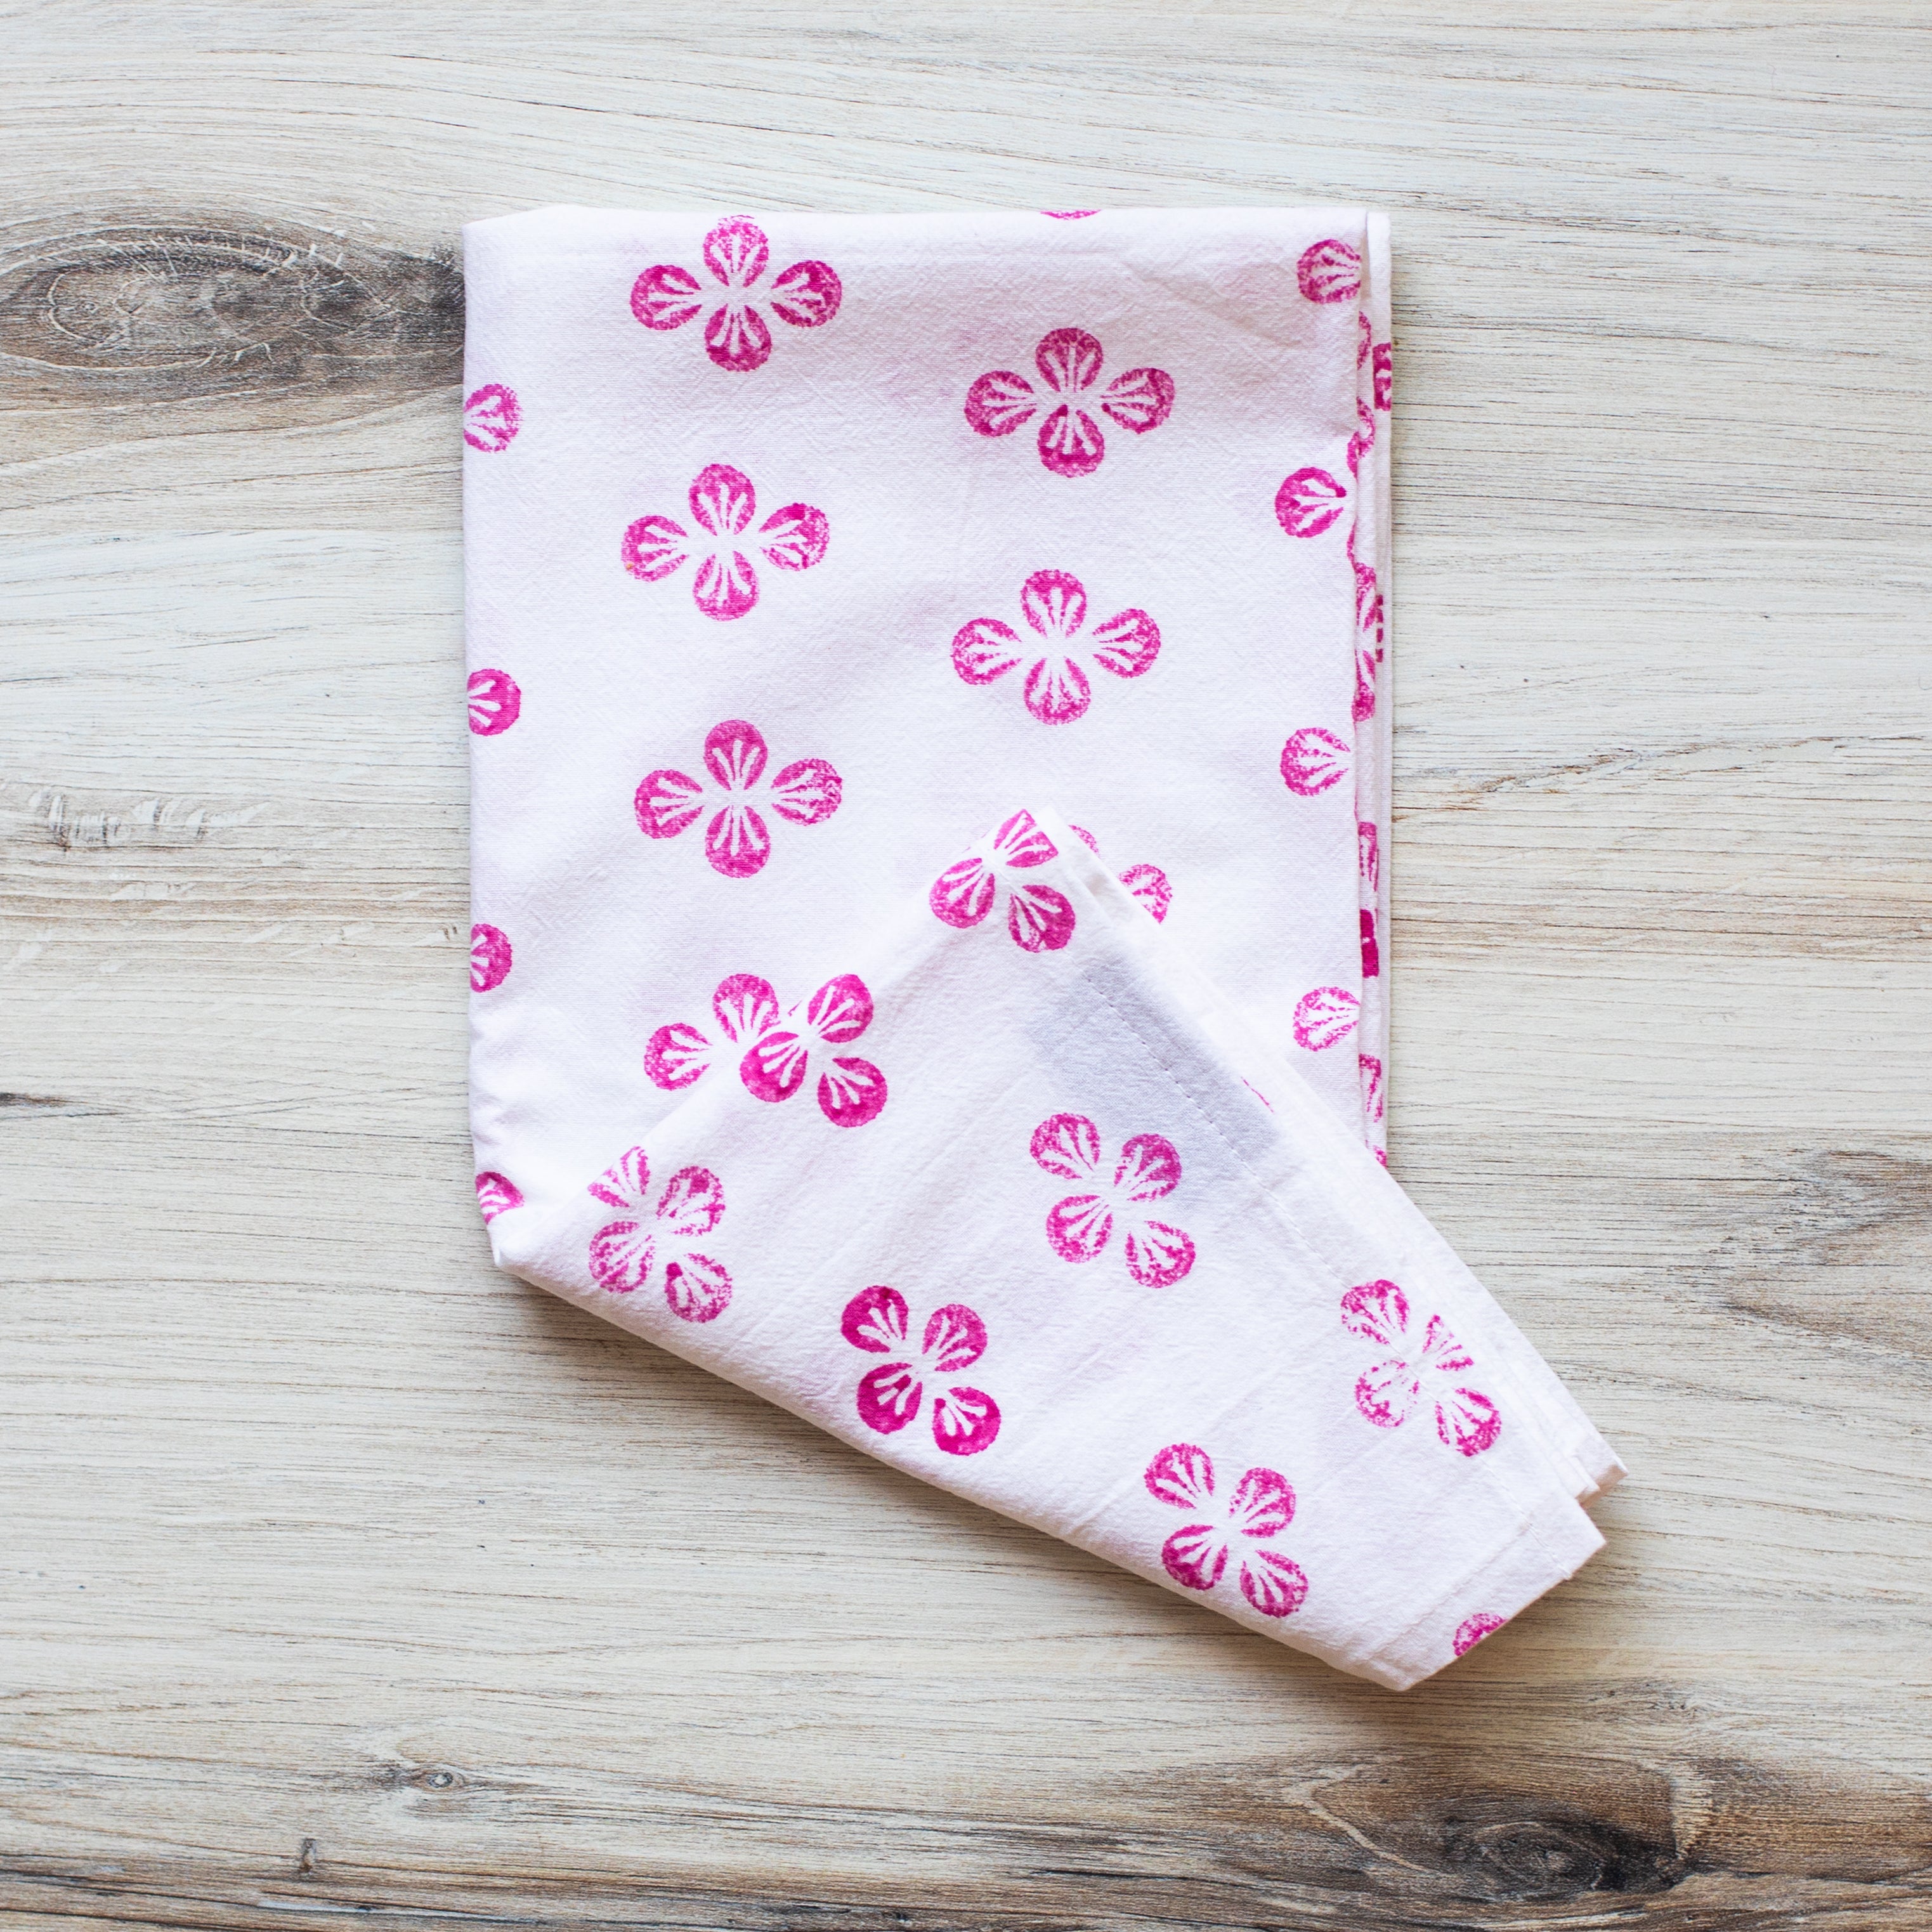 Tea Towel - Dogwood, Pink by Mended